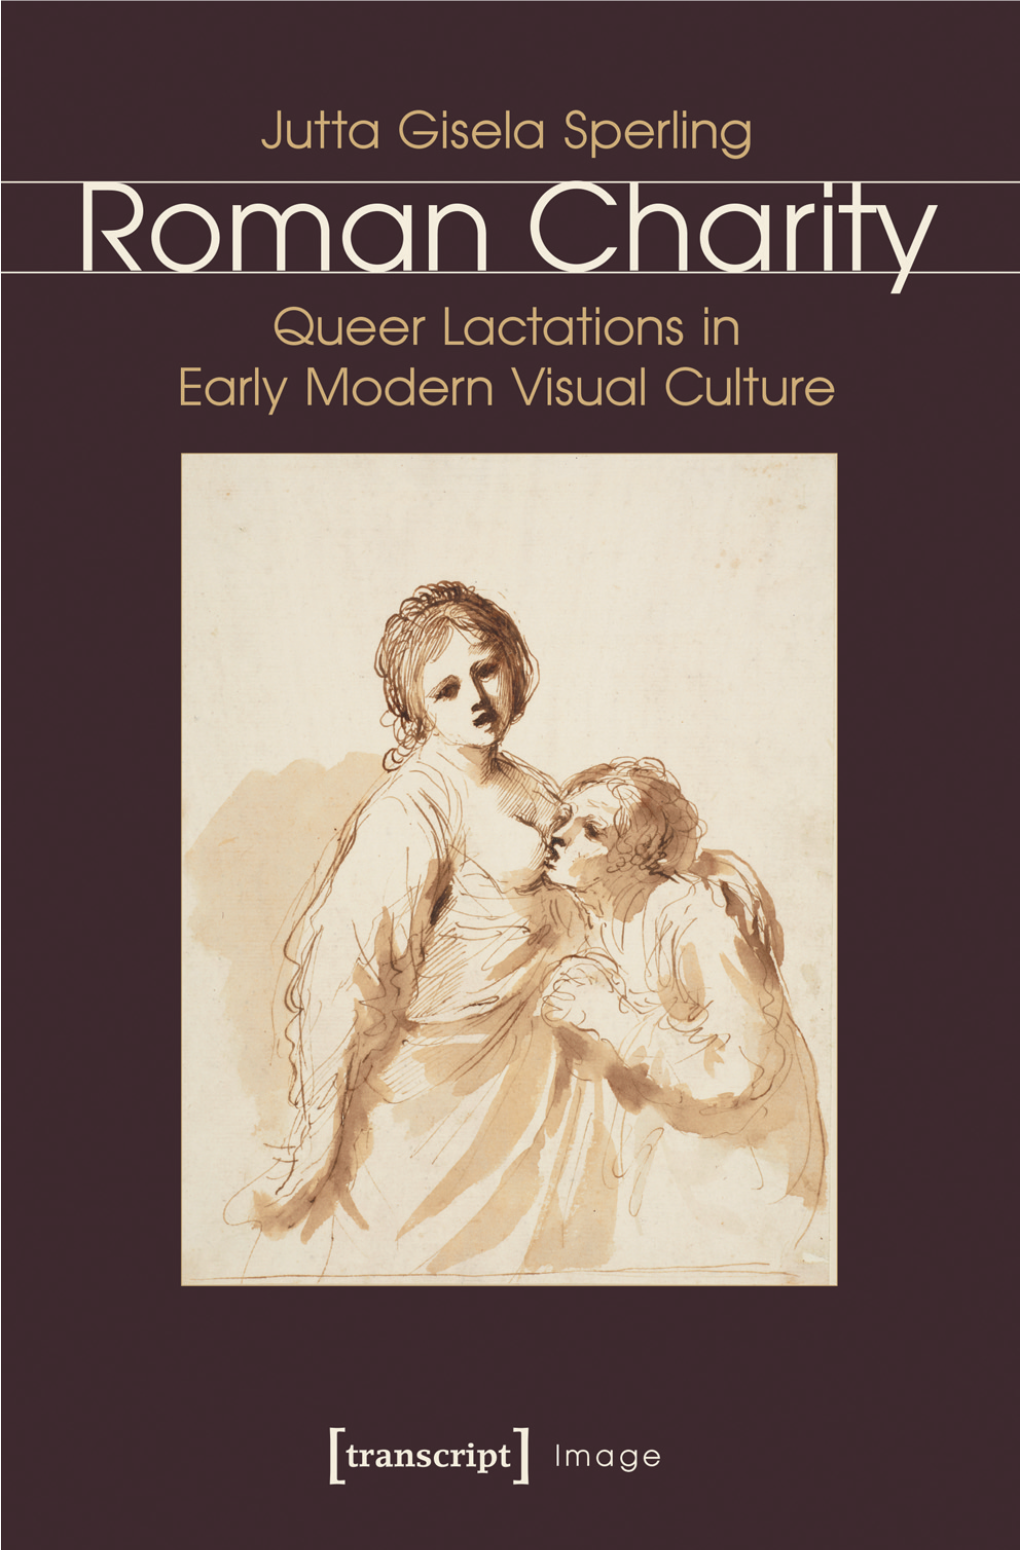 Roman Charity Queer Lactations in Early Modern Visual Culture